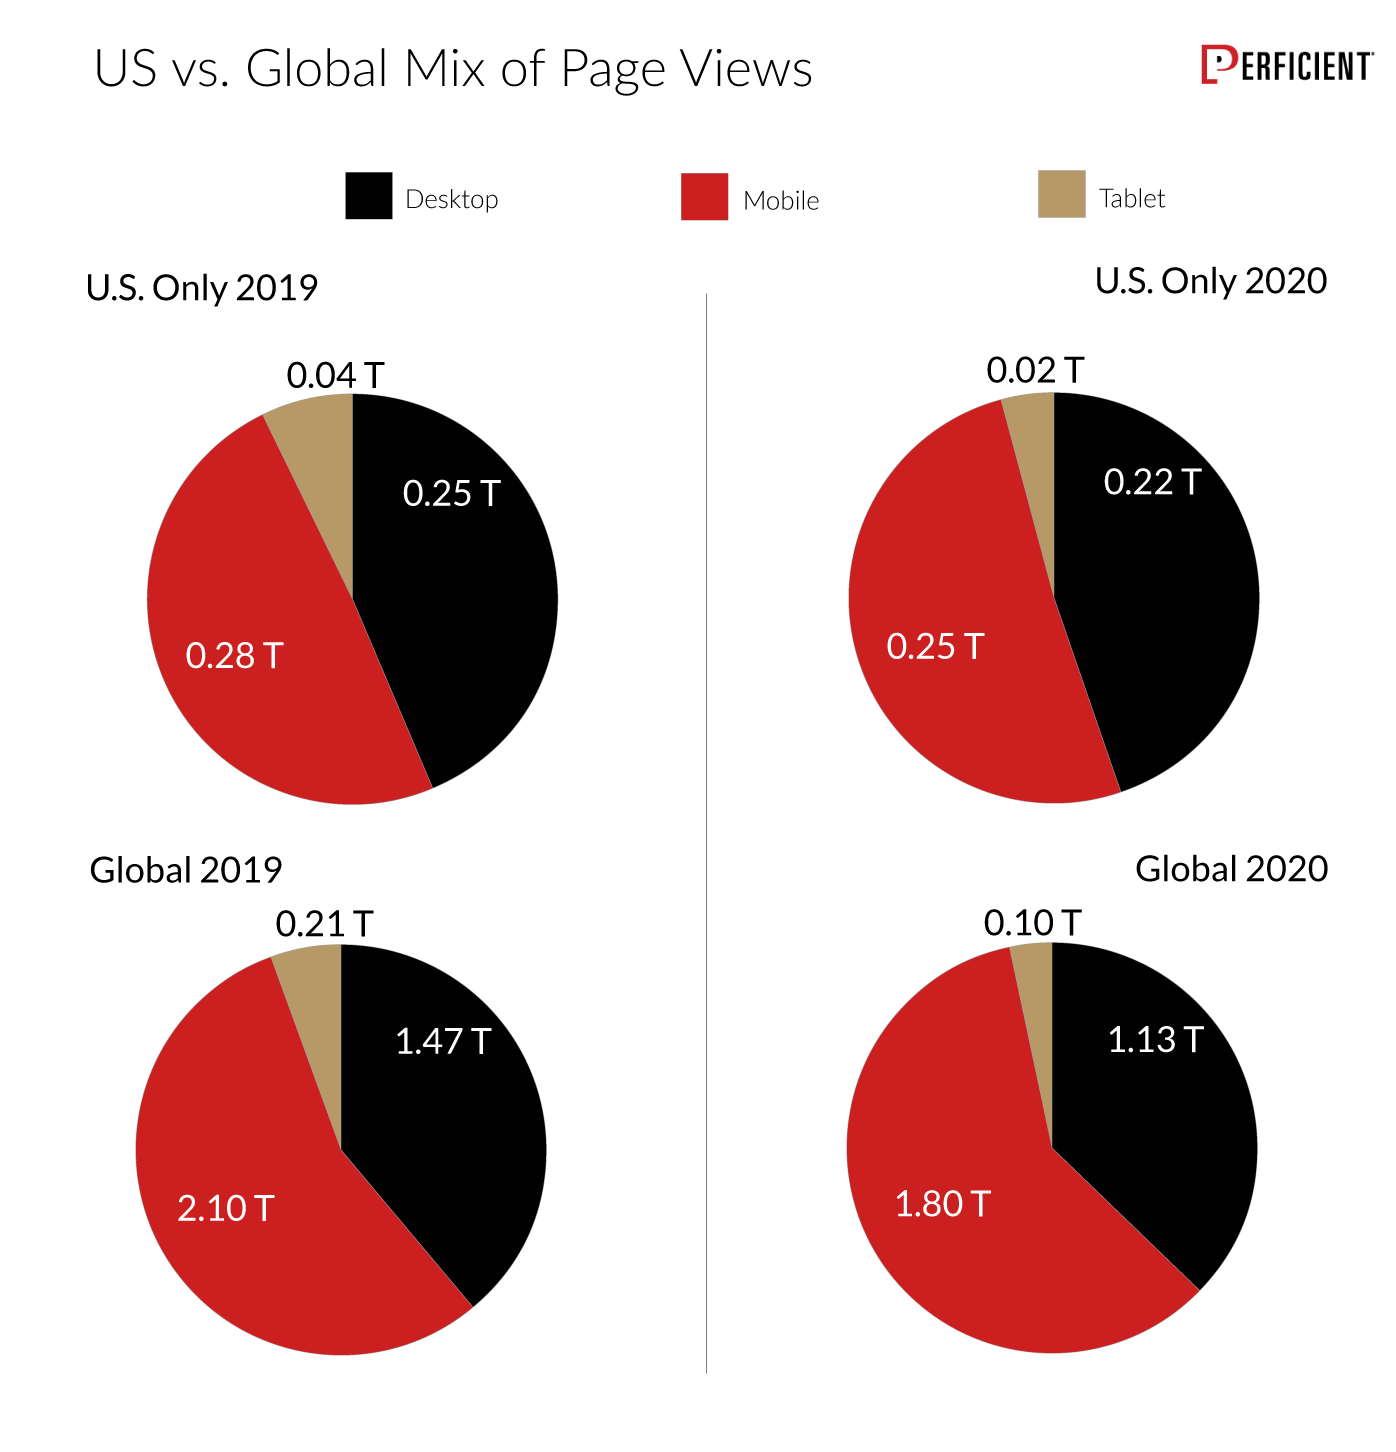 Us vs. Global Mix Of Page Views for Desktop, Mobile, and Tablet in 2019 and 2020